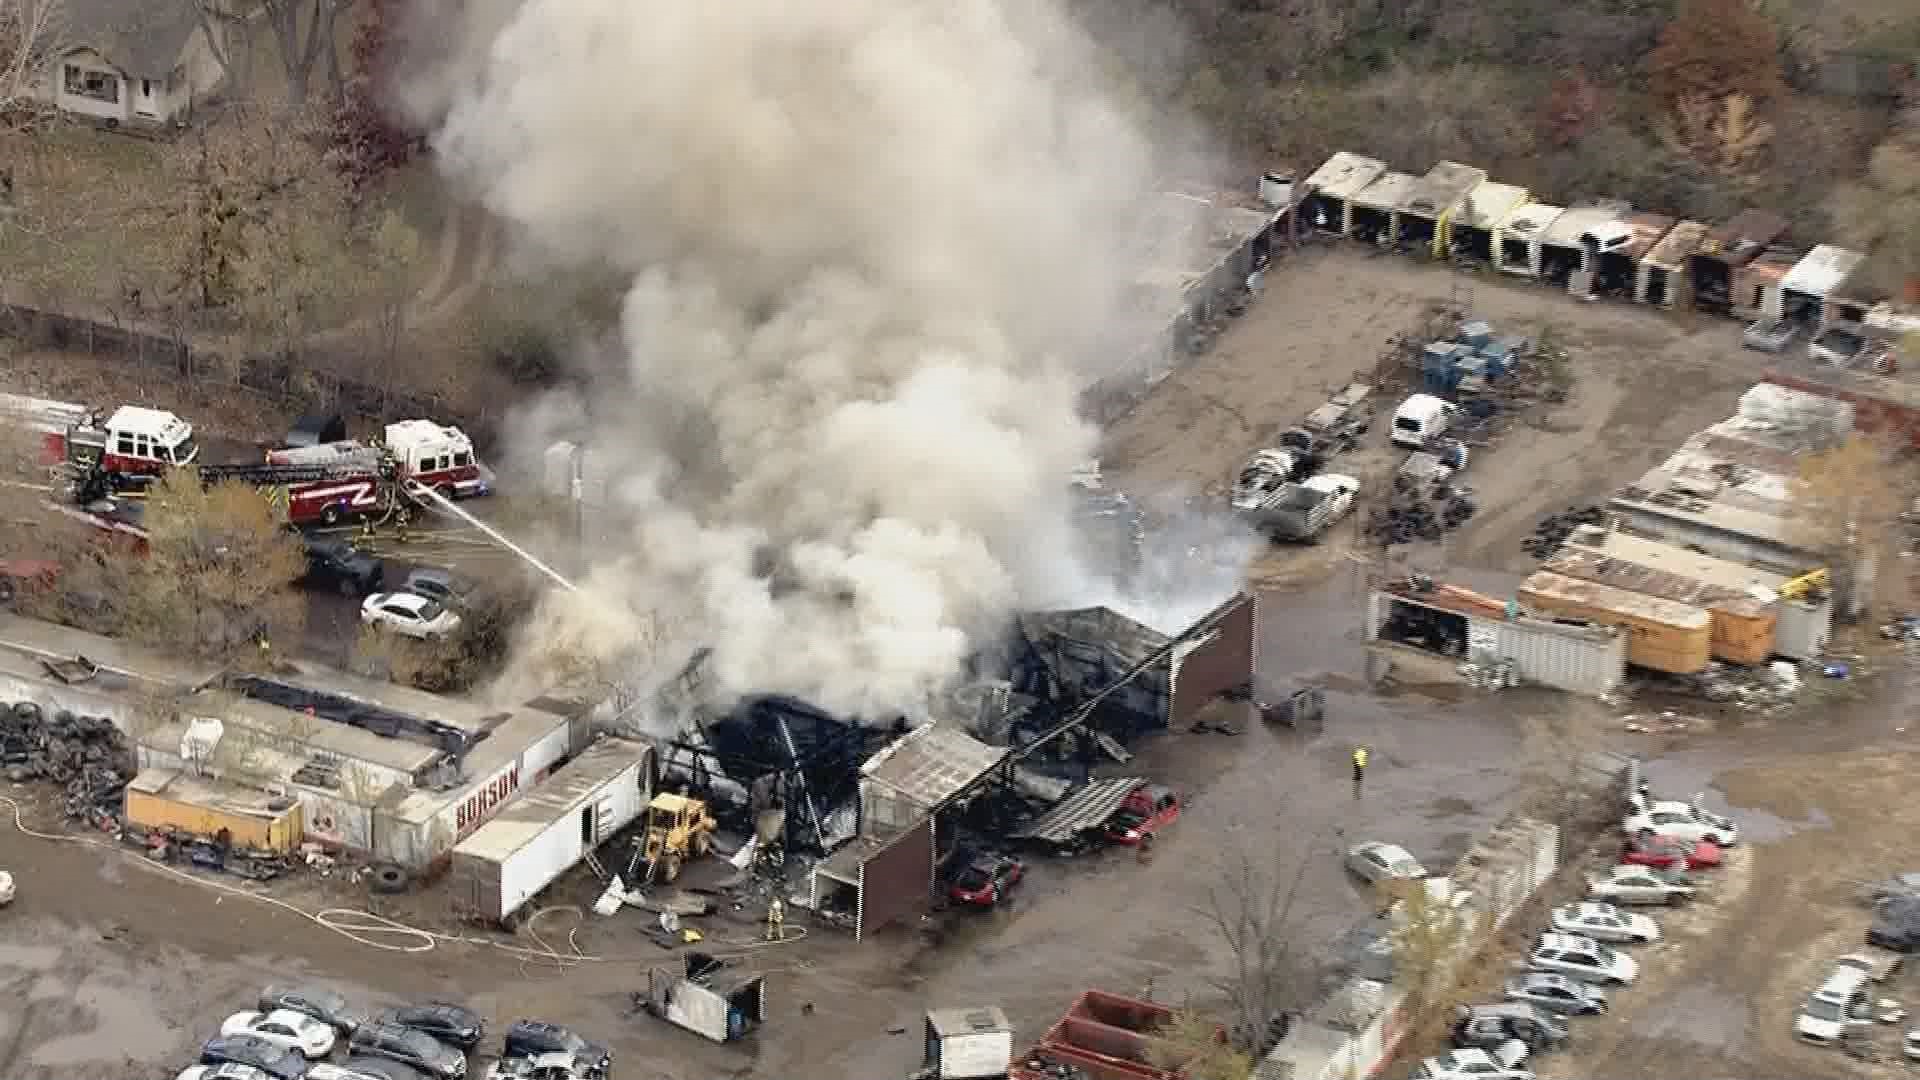 Crews spent several hours battling a fire Wednesday at an auto salvage business in Shakopee.